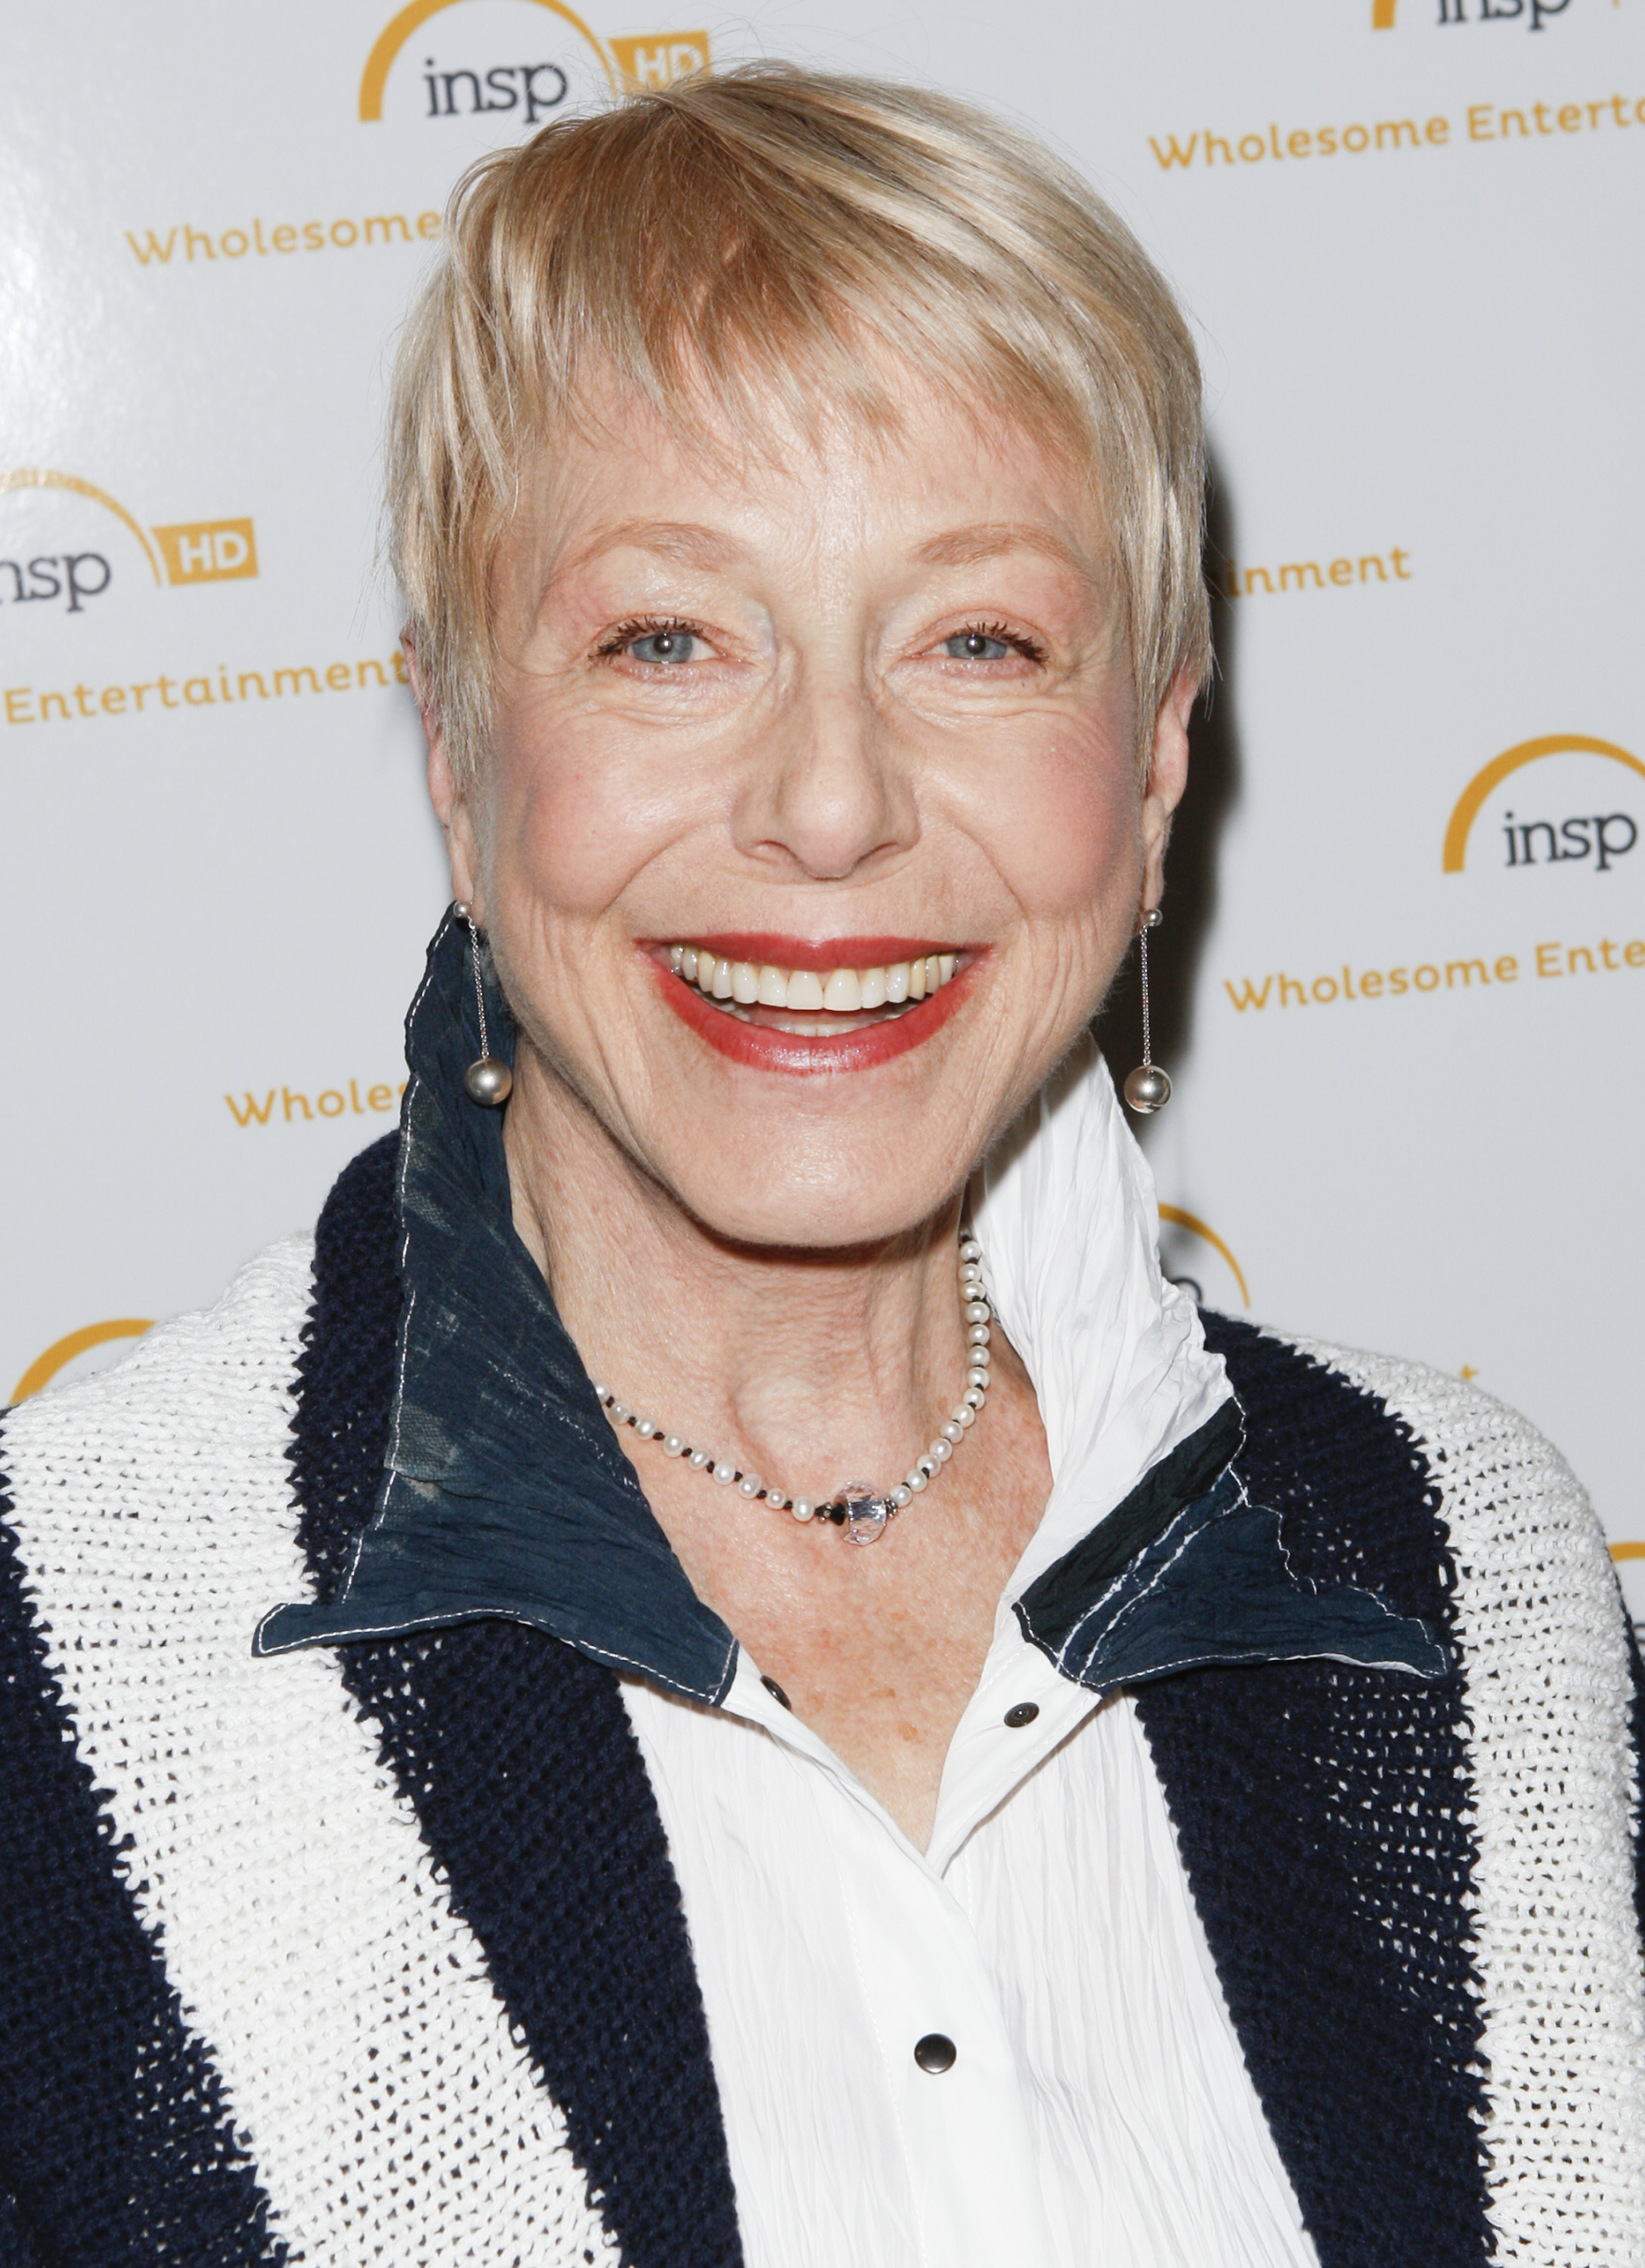 Karen Grassle at The Cable Show on April 30, 2014 in Los Angeles, California | Source: Getty Images